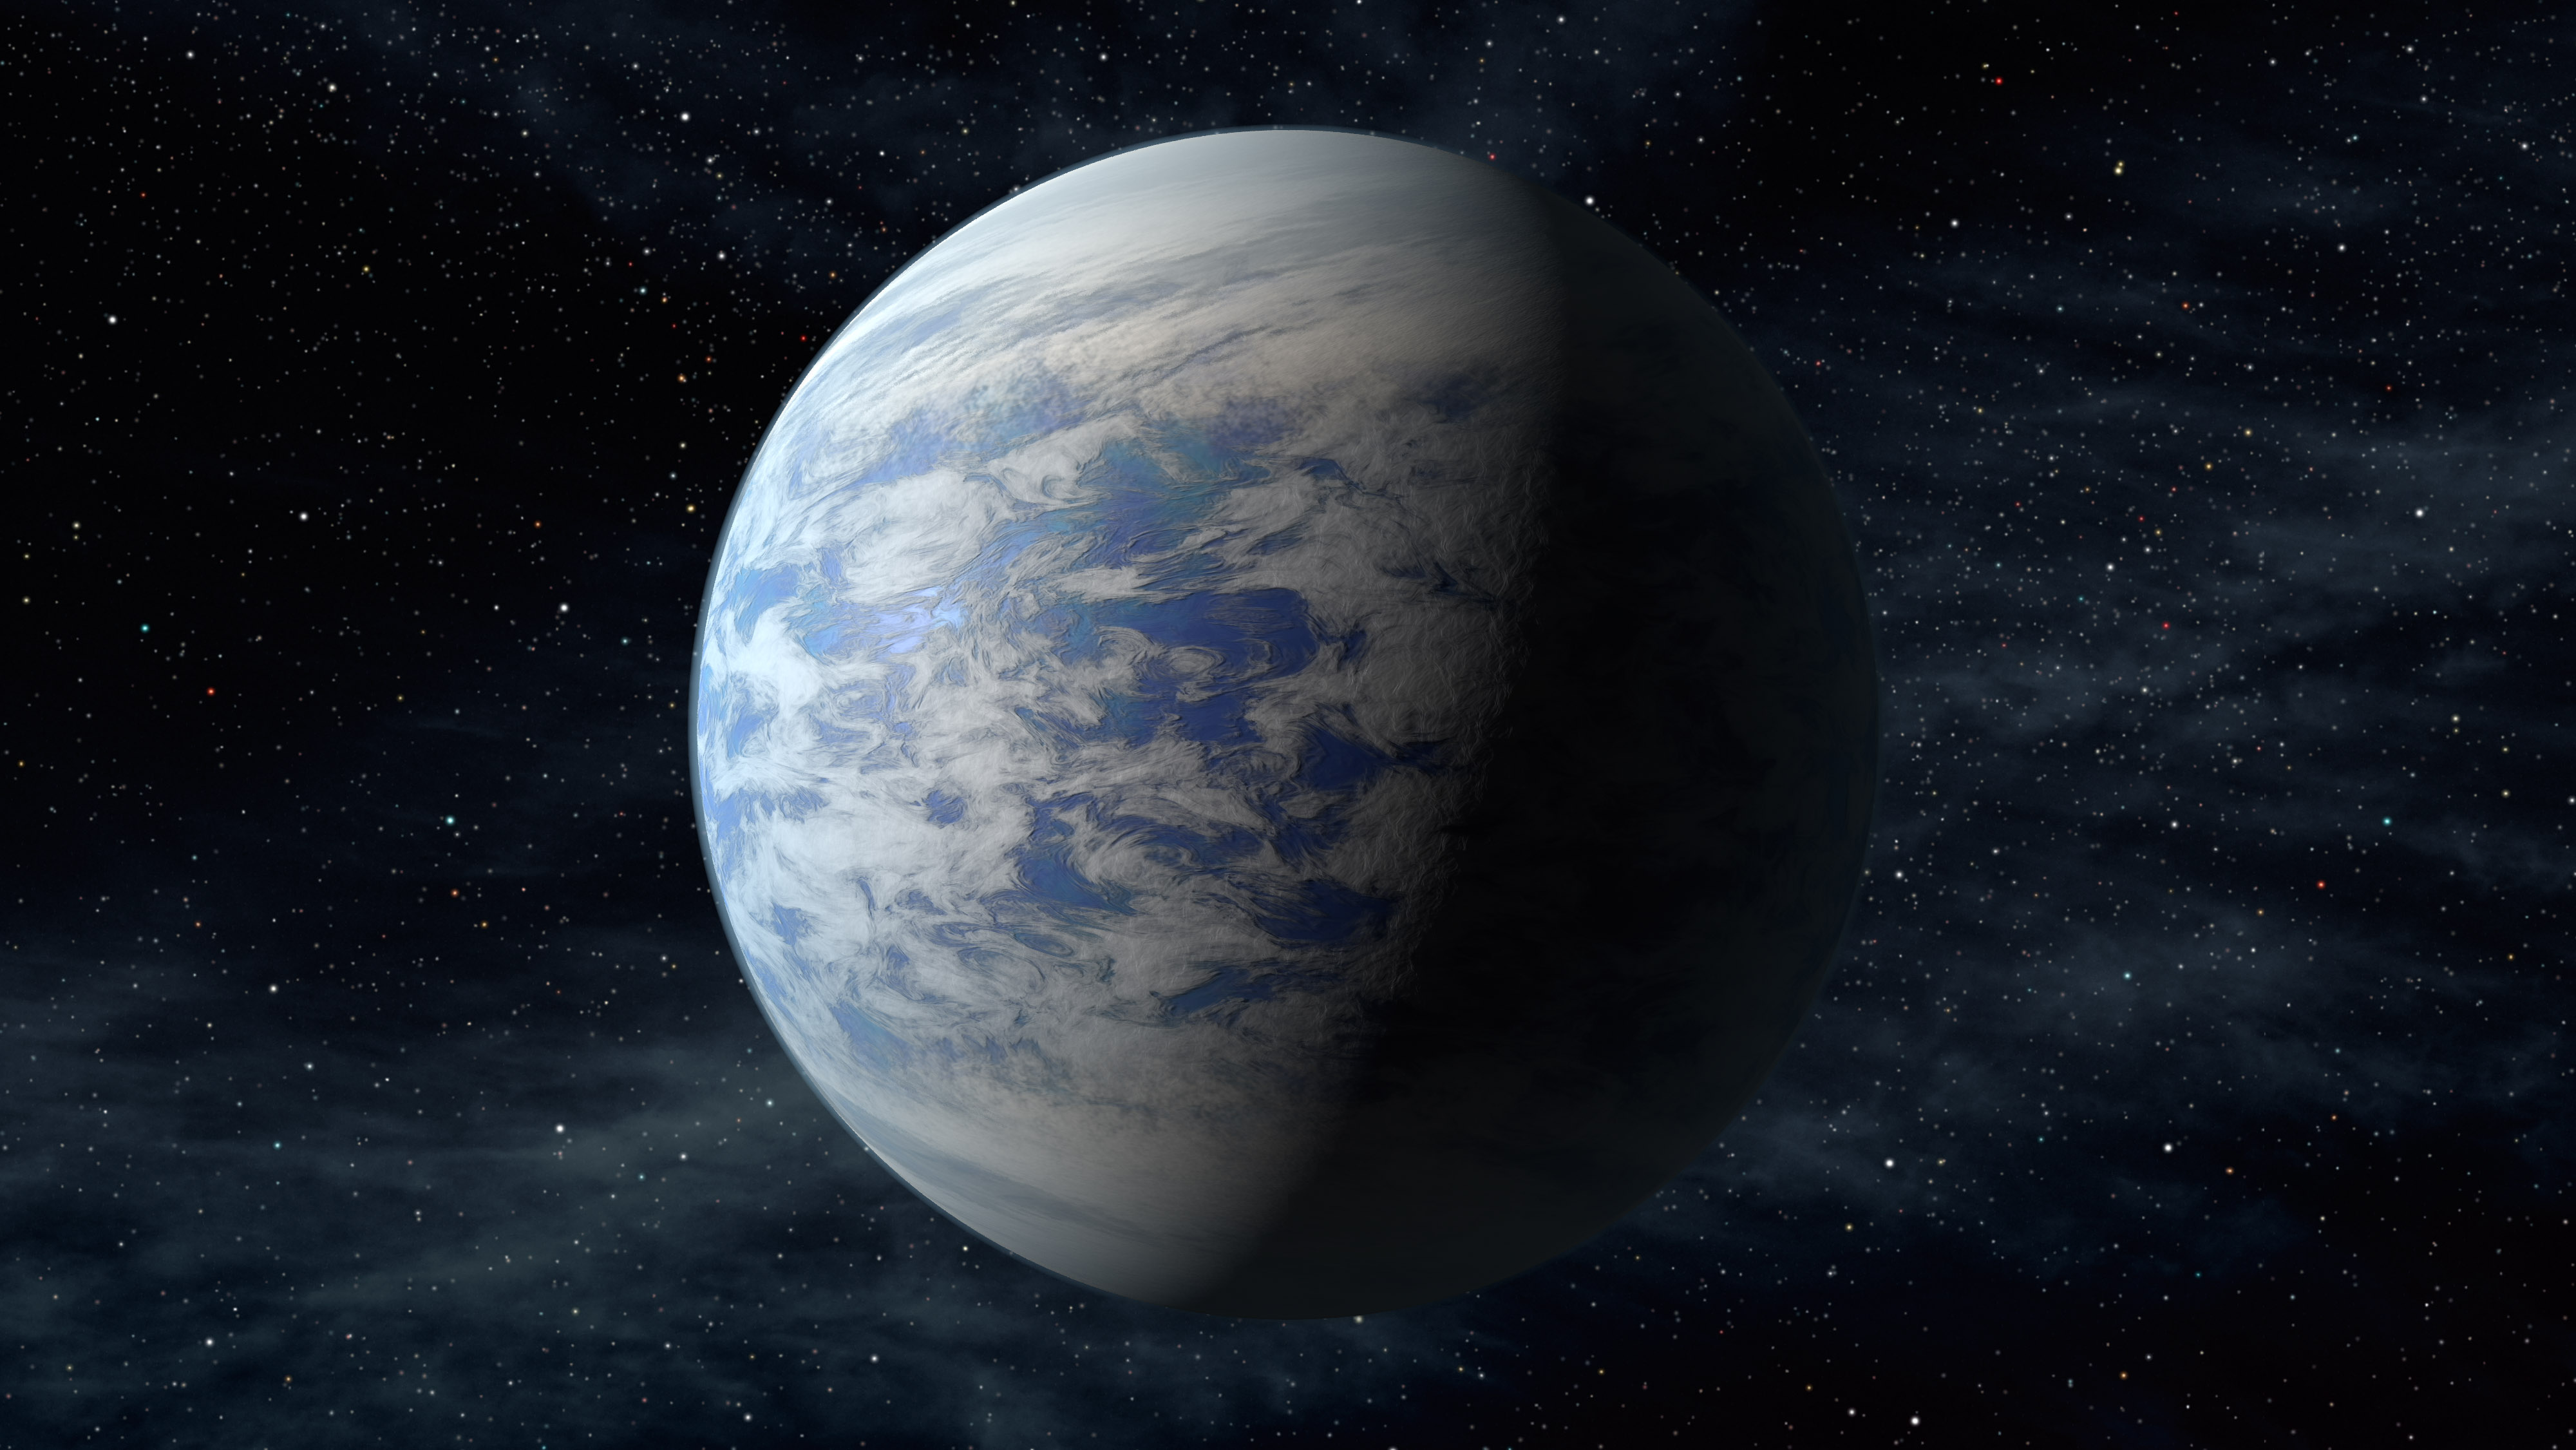 An artistic depiction of Kepler-69c, a super-Earth-size planet in the habitable zone of a star much like our sun. Photo from NASA